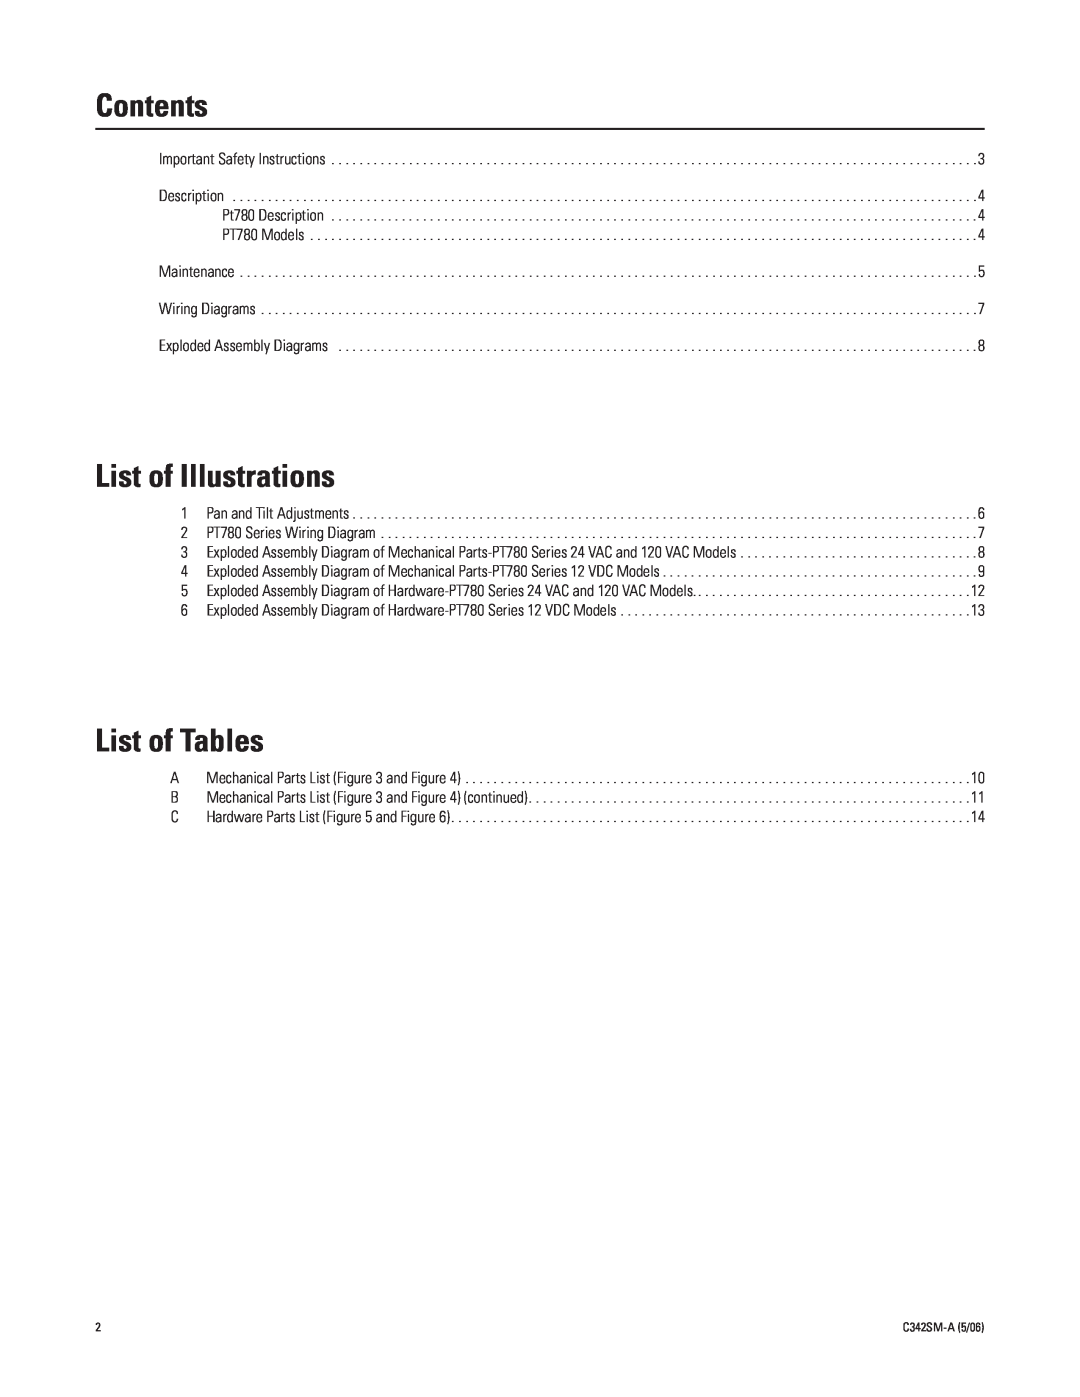 Pelco PT7800 manual Contents, List of Illustrations, List of Tables 